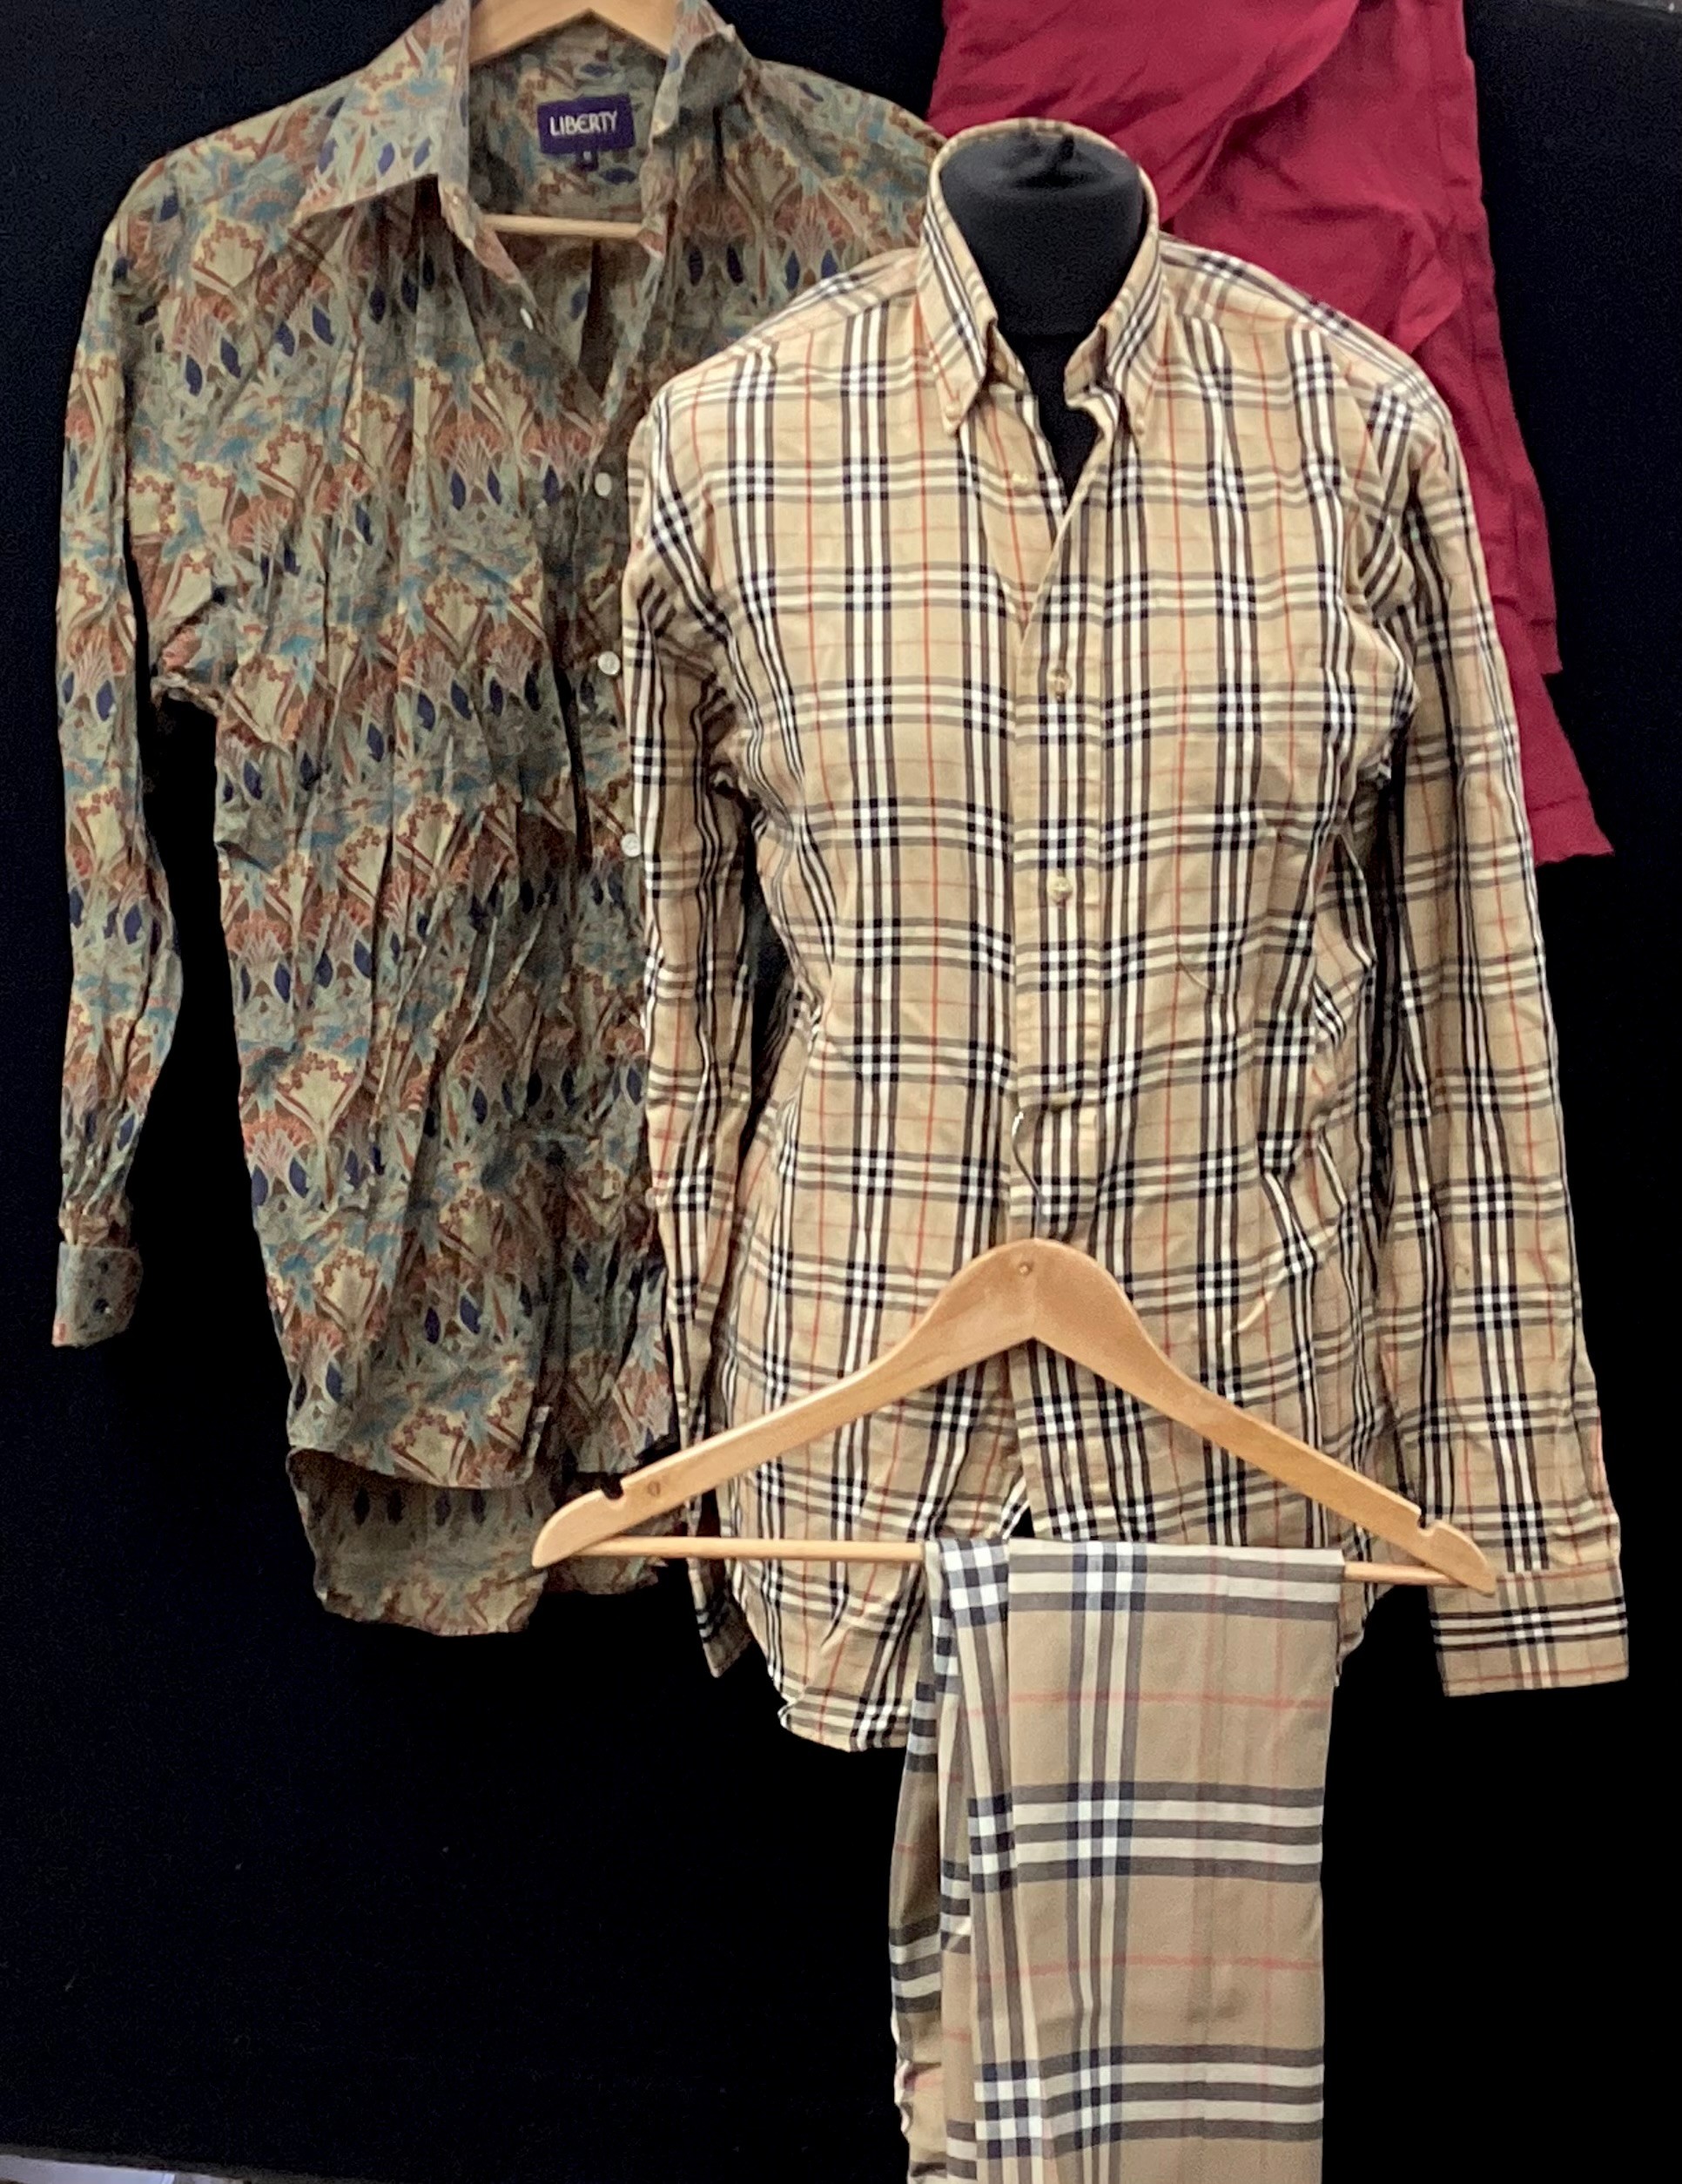 Ladies fashion - Burberry shirt, size S conforming trousers, size 8,Liberty shirt, size M, Laura